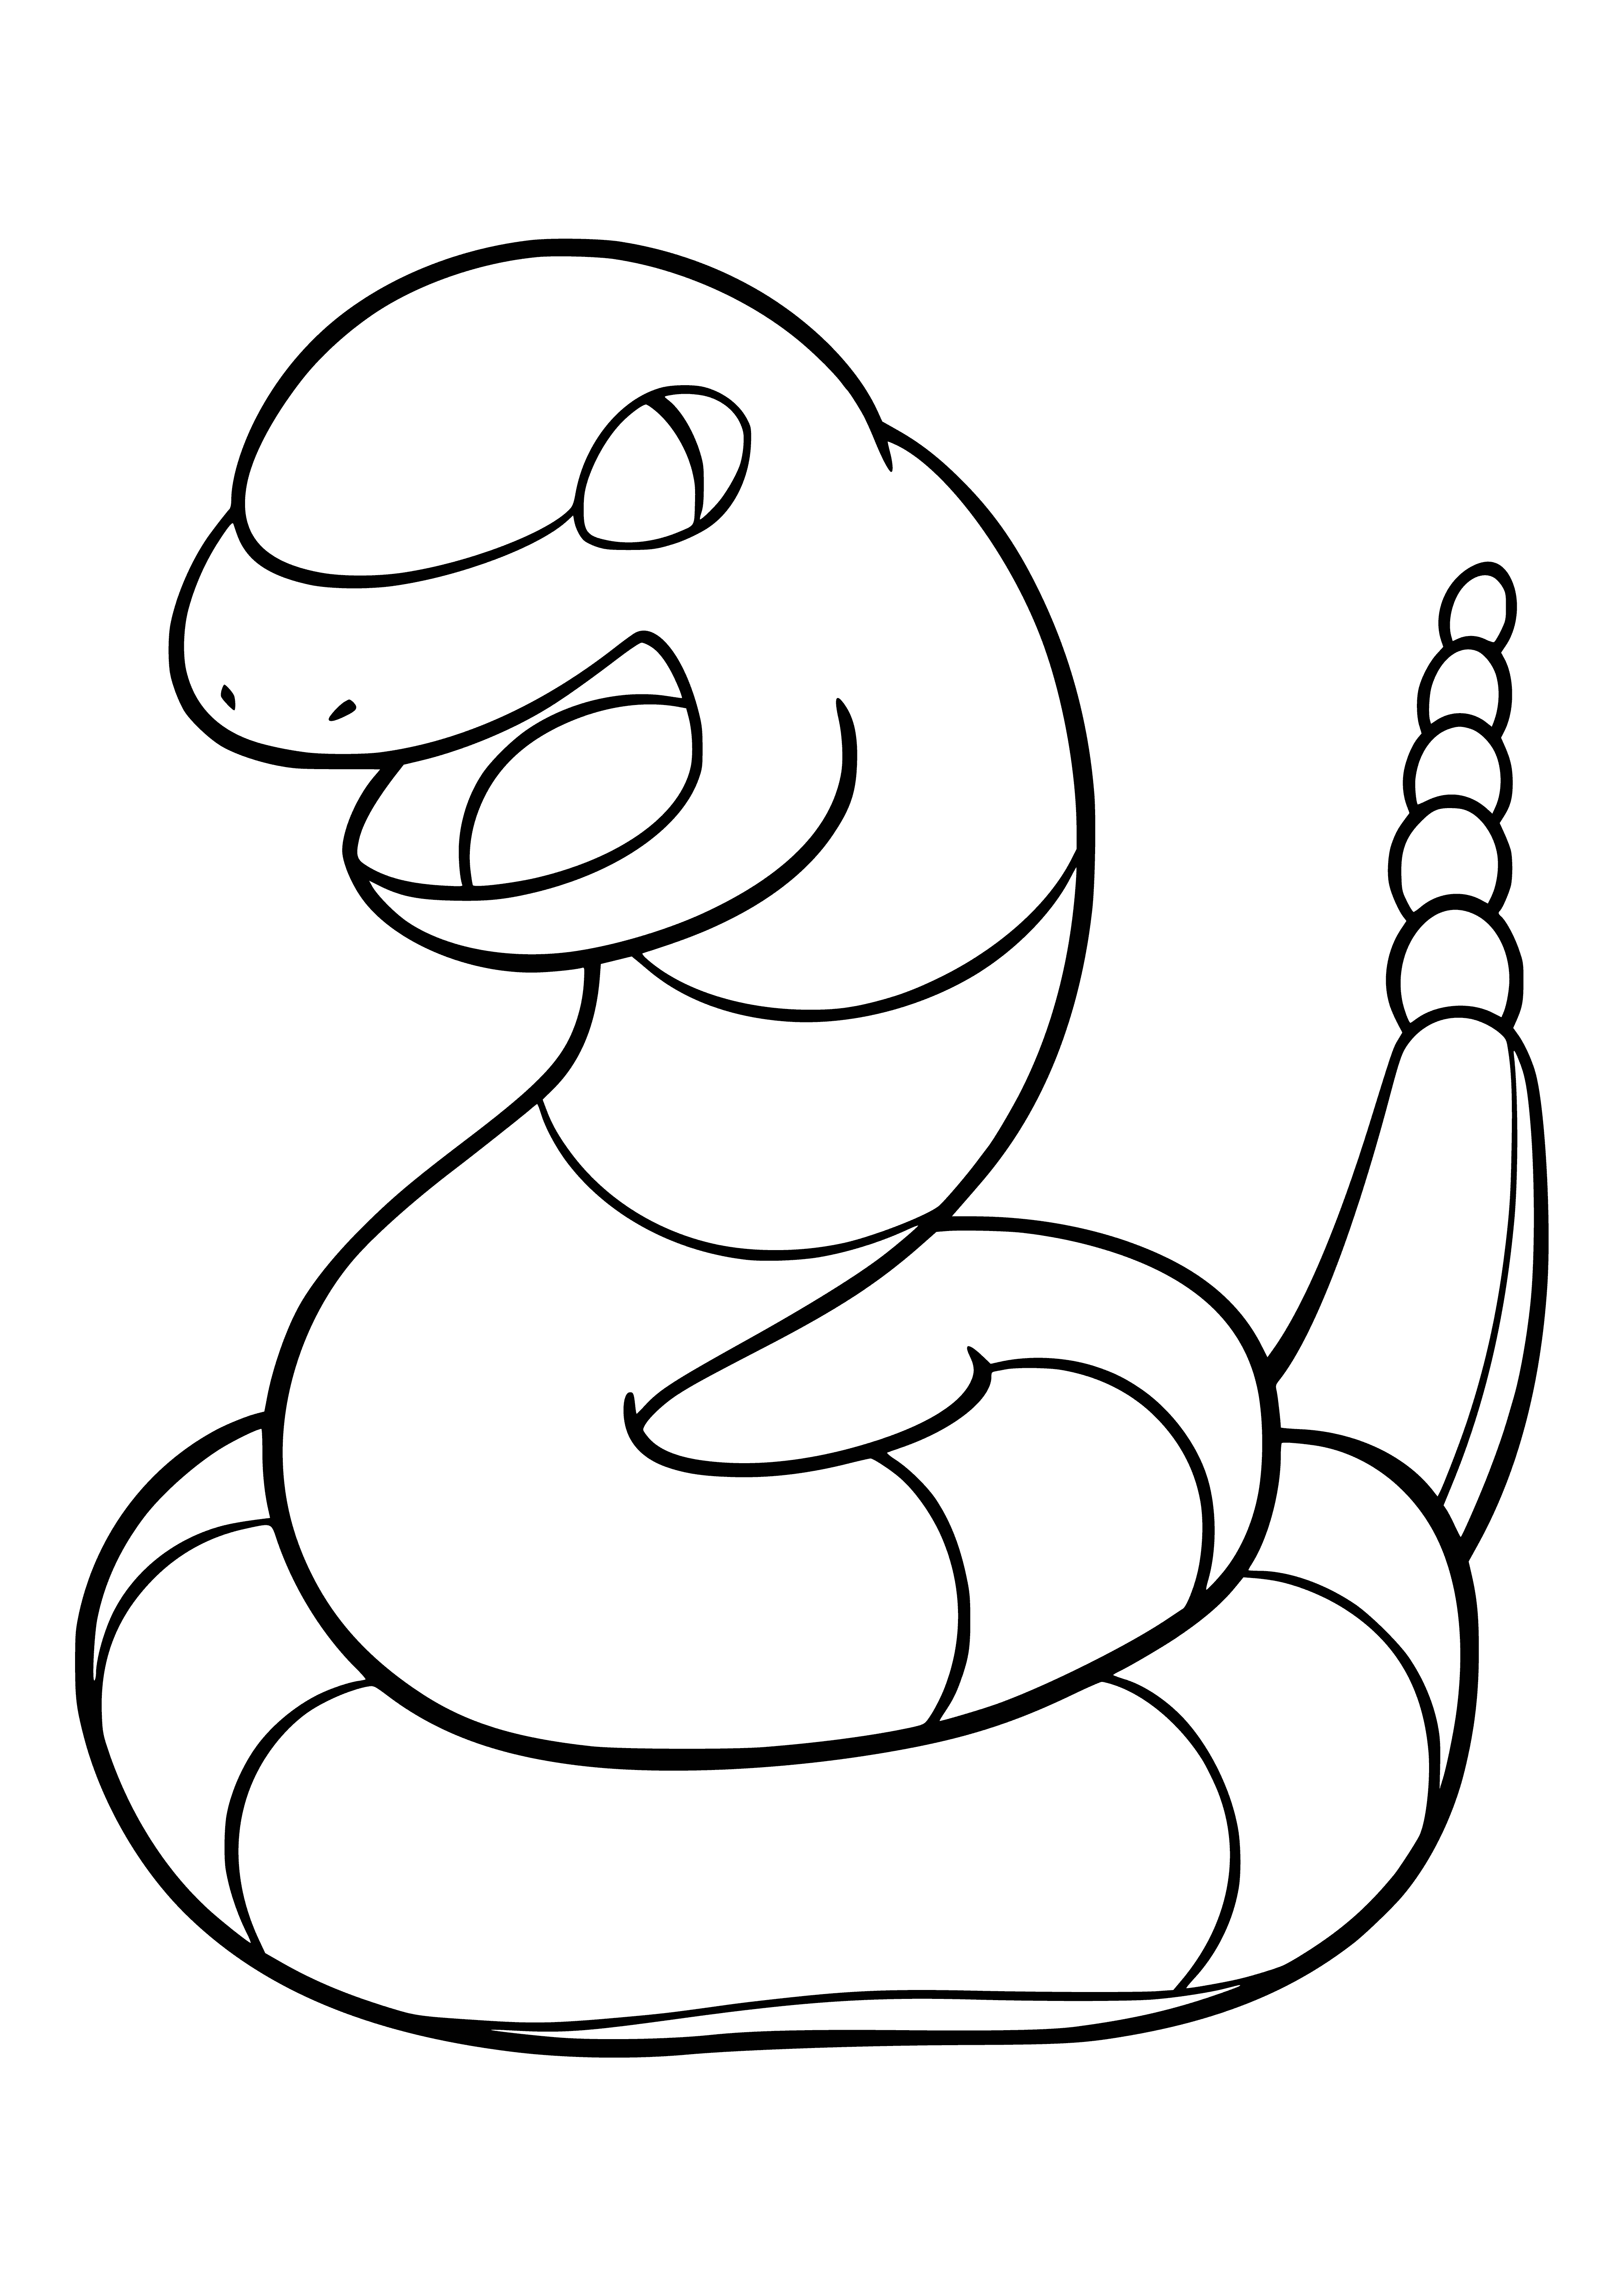 coloring page: Purple snake Pokemon w/ red eyes & black markings. White underbelly & long, thin purple tail.